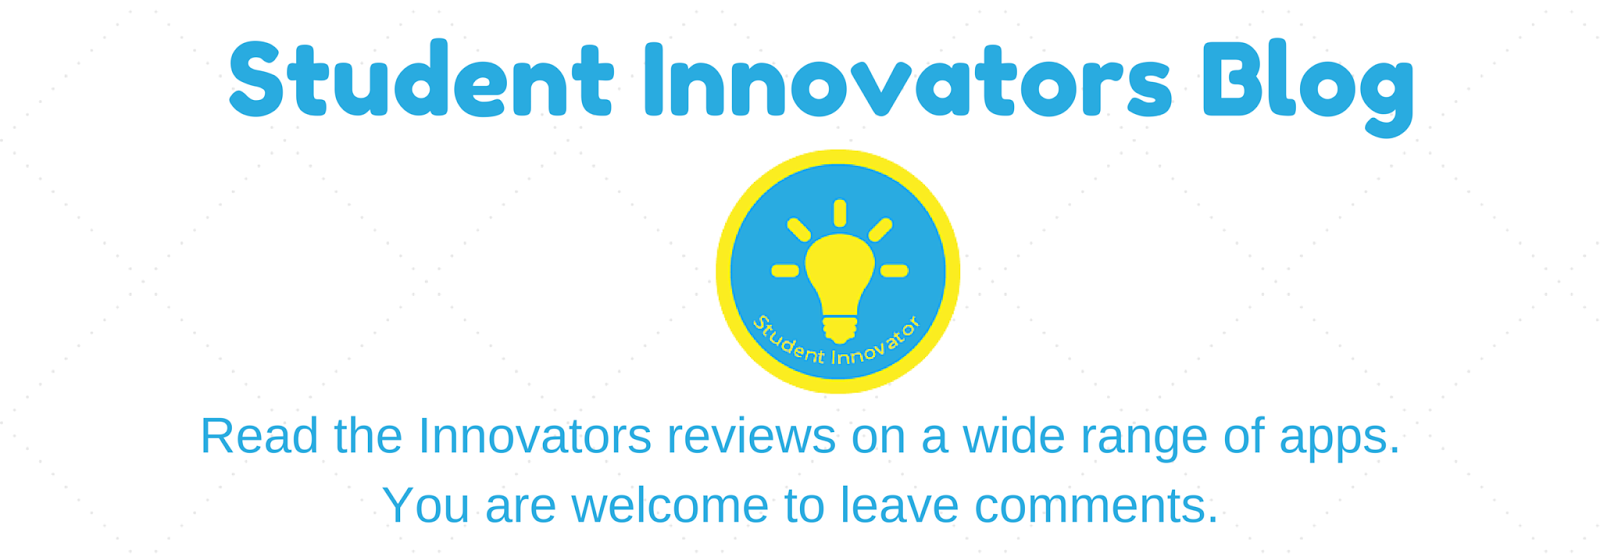 Welcome to the Student Innovator Blog